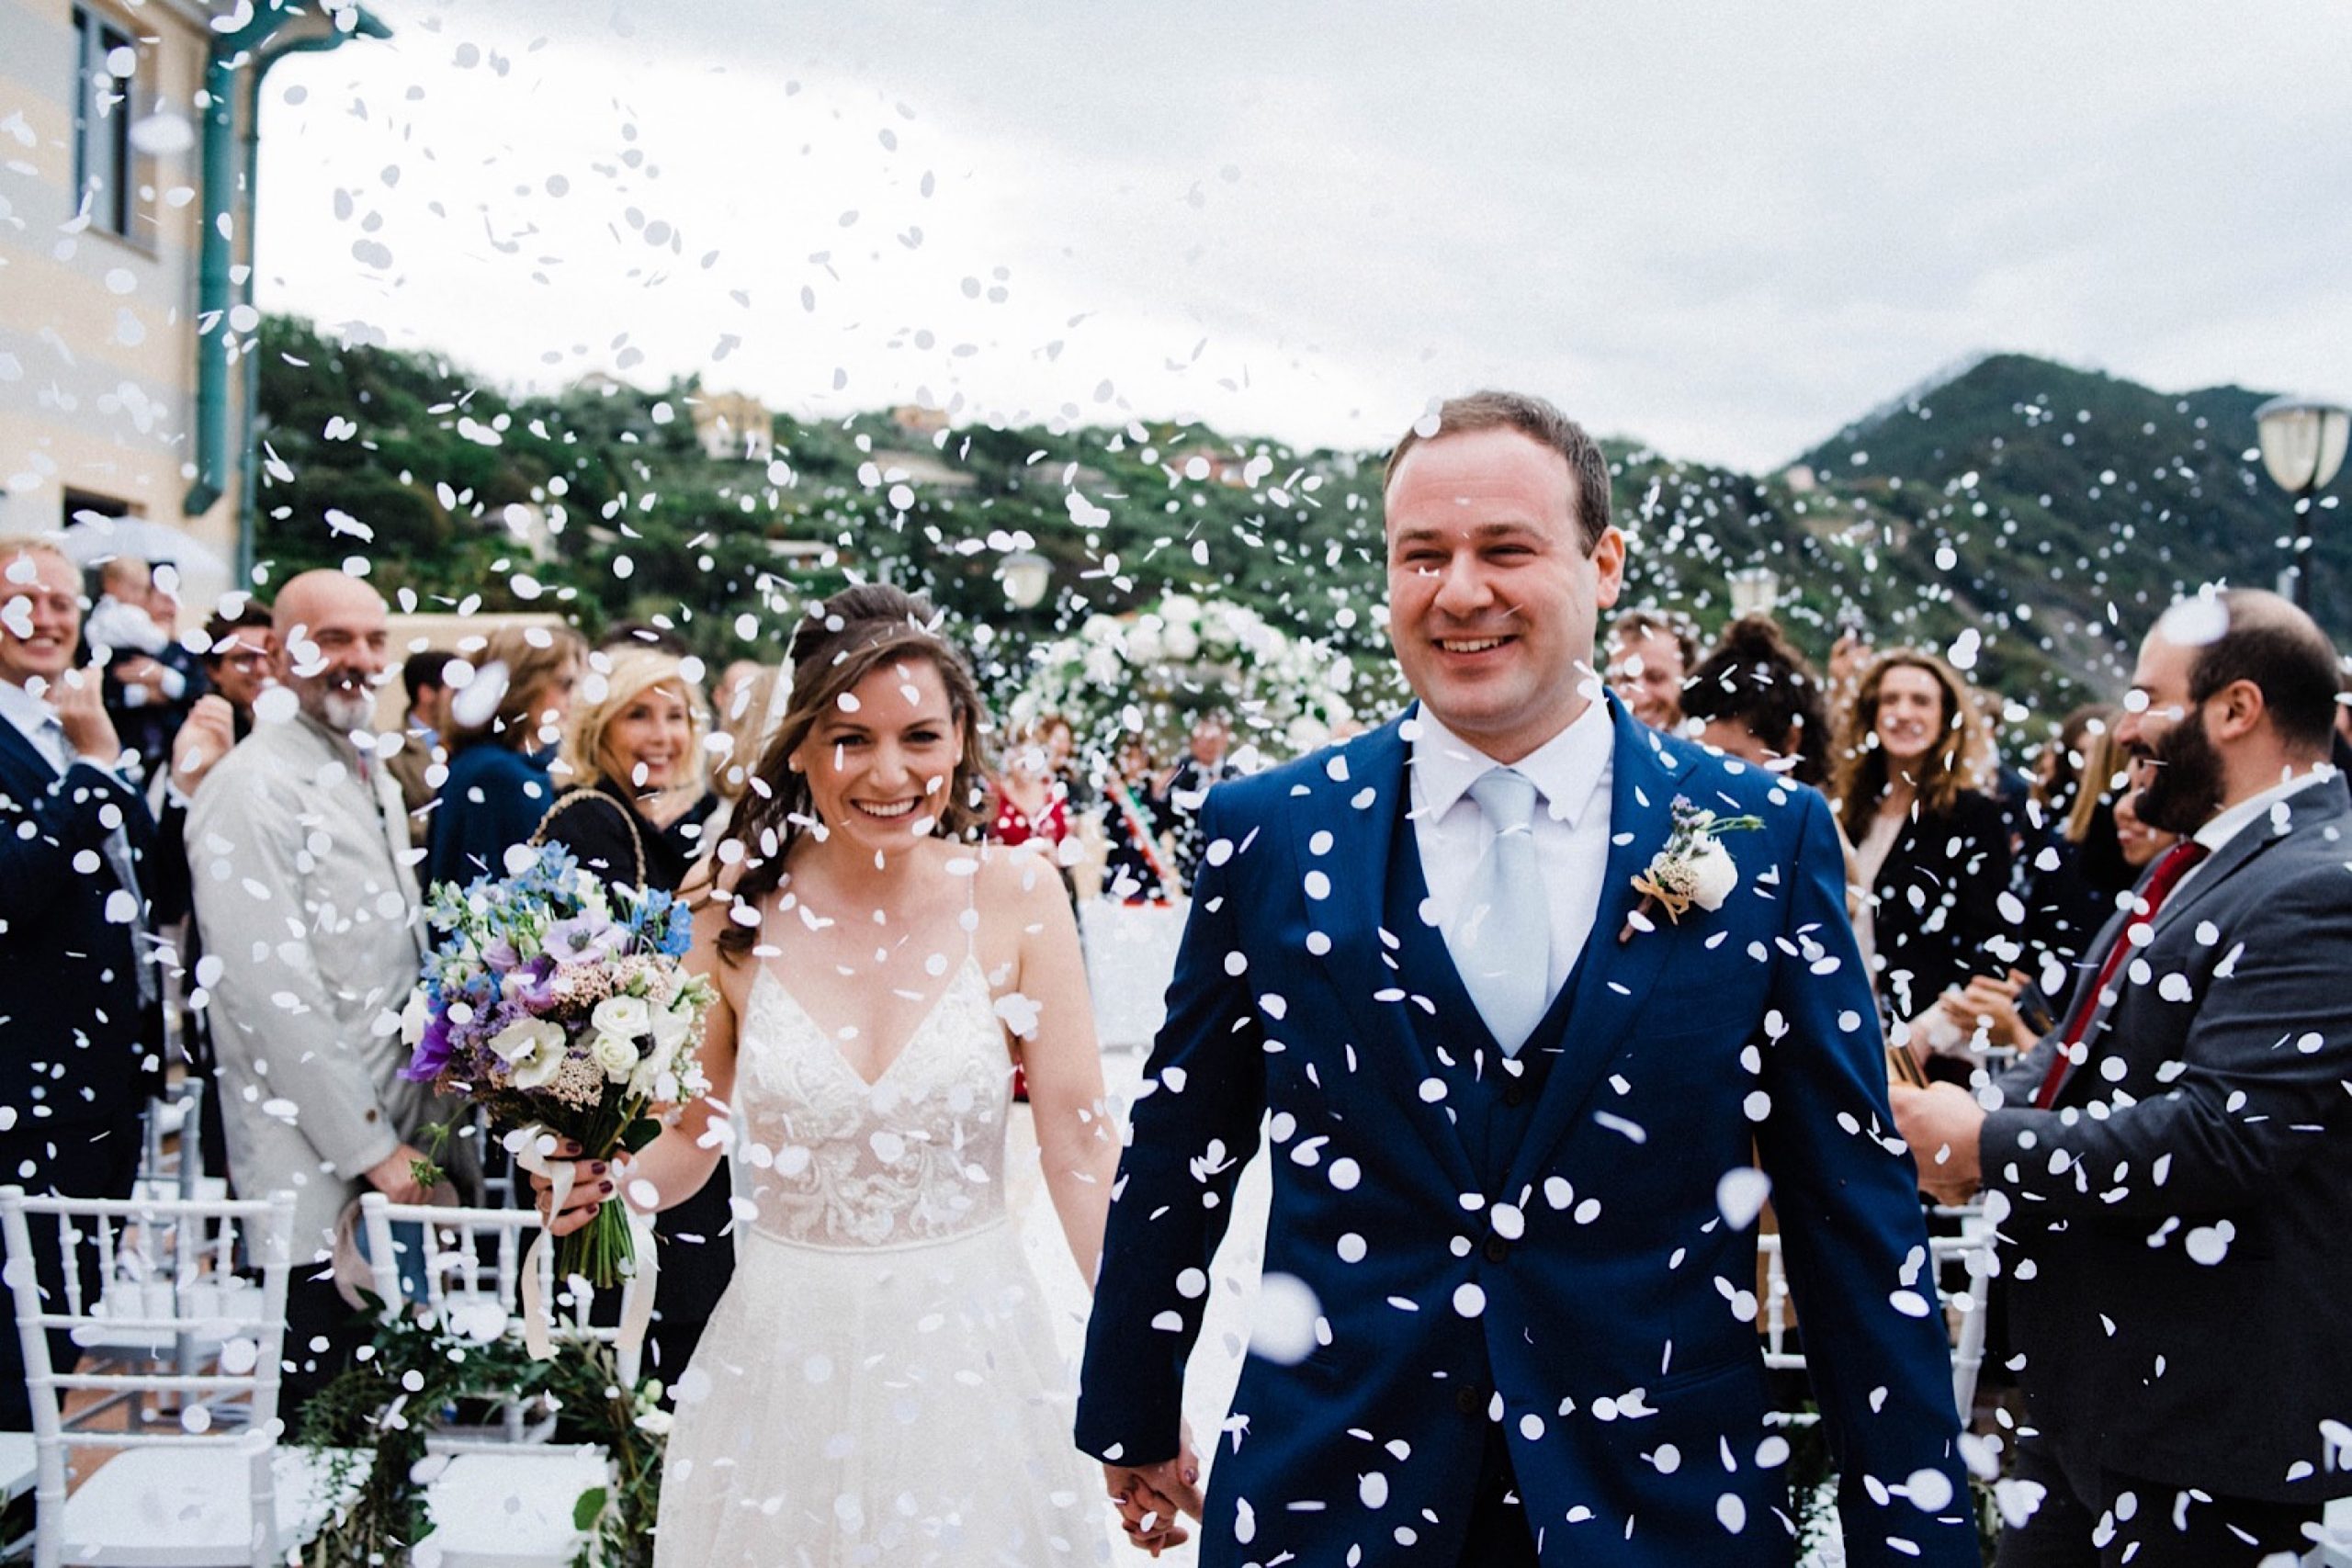 Italian Riviera Destination Wedding Photography of the bride & groom walking back down the aisle as guests throw confetti all around them.